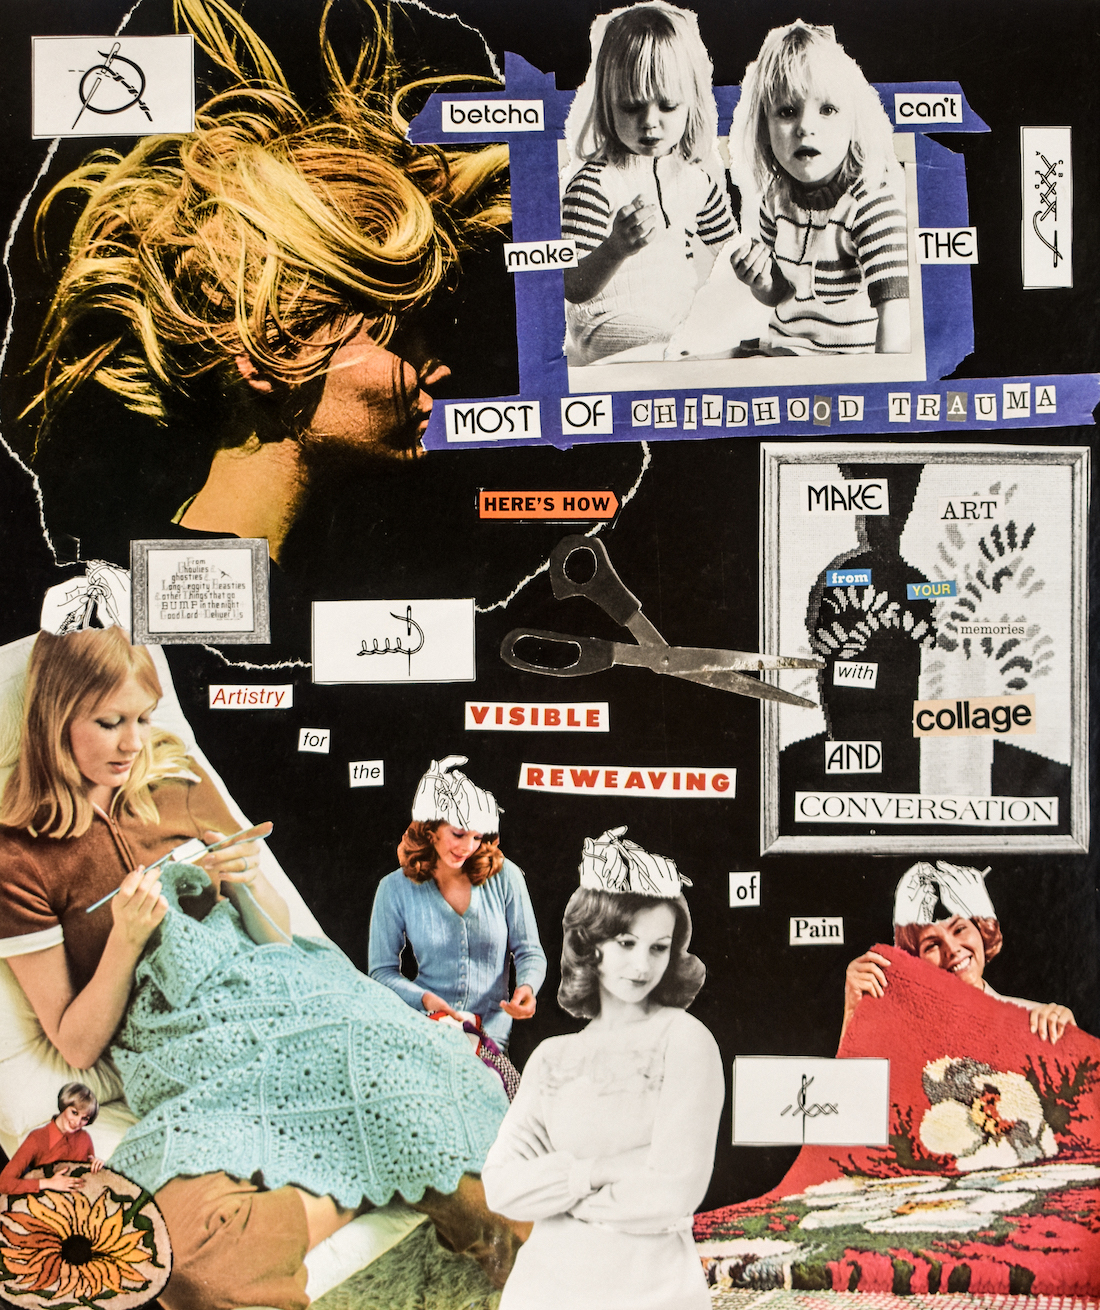 A collage of text and images of women from magazines. Text messages include “Betcha can’t make the most of childhood trauma” and “Artistry for the visible reweaving of pain.”